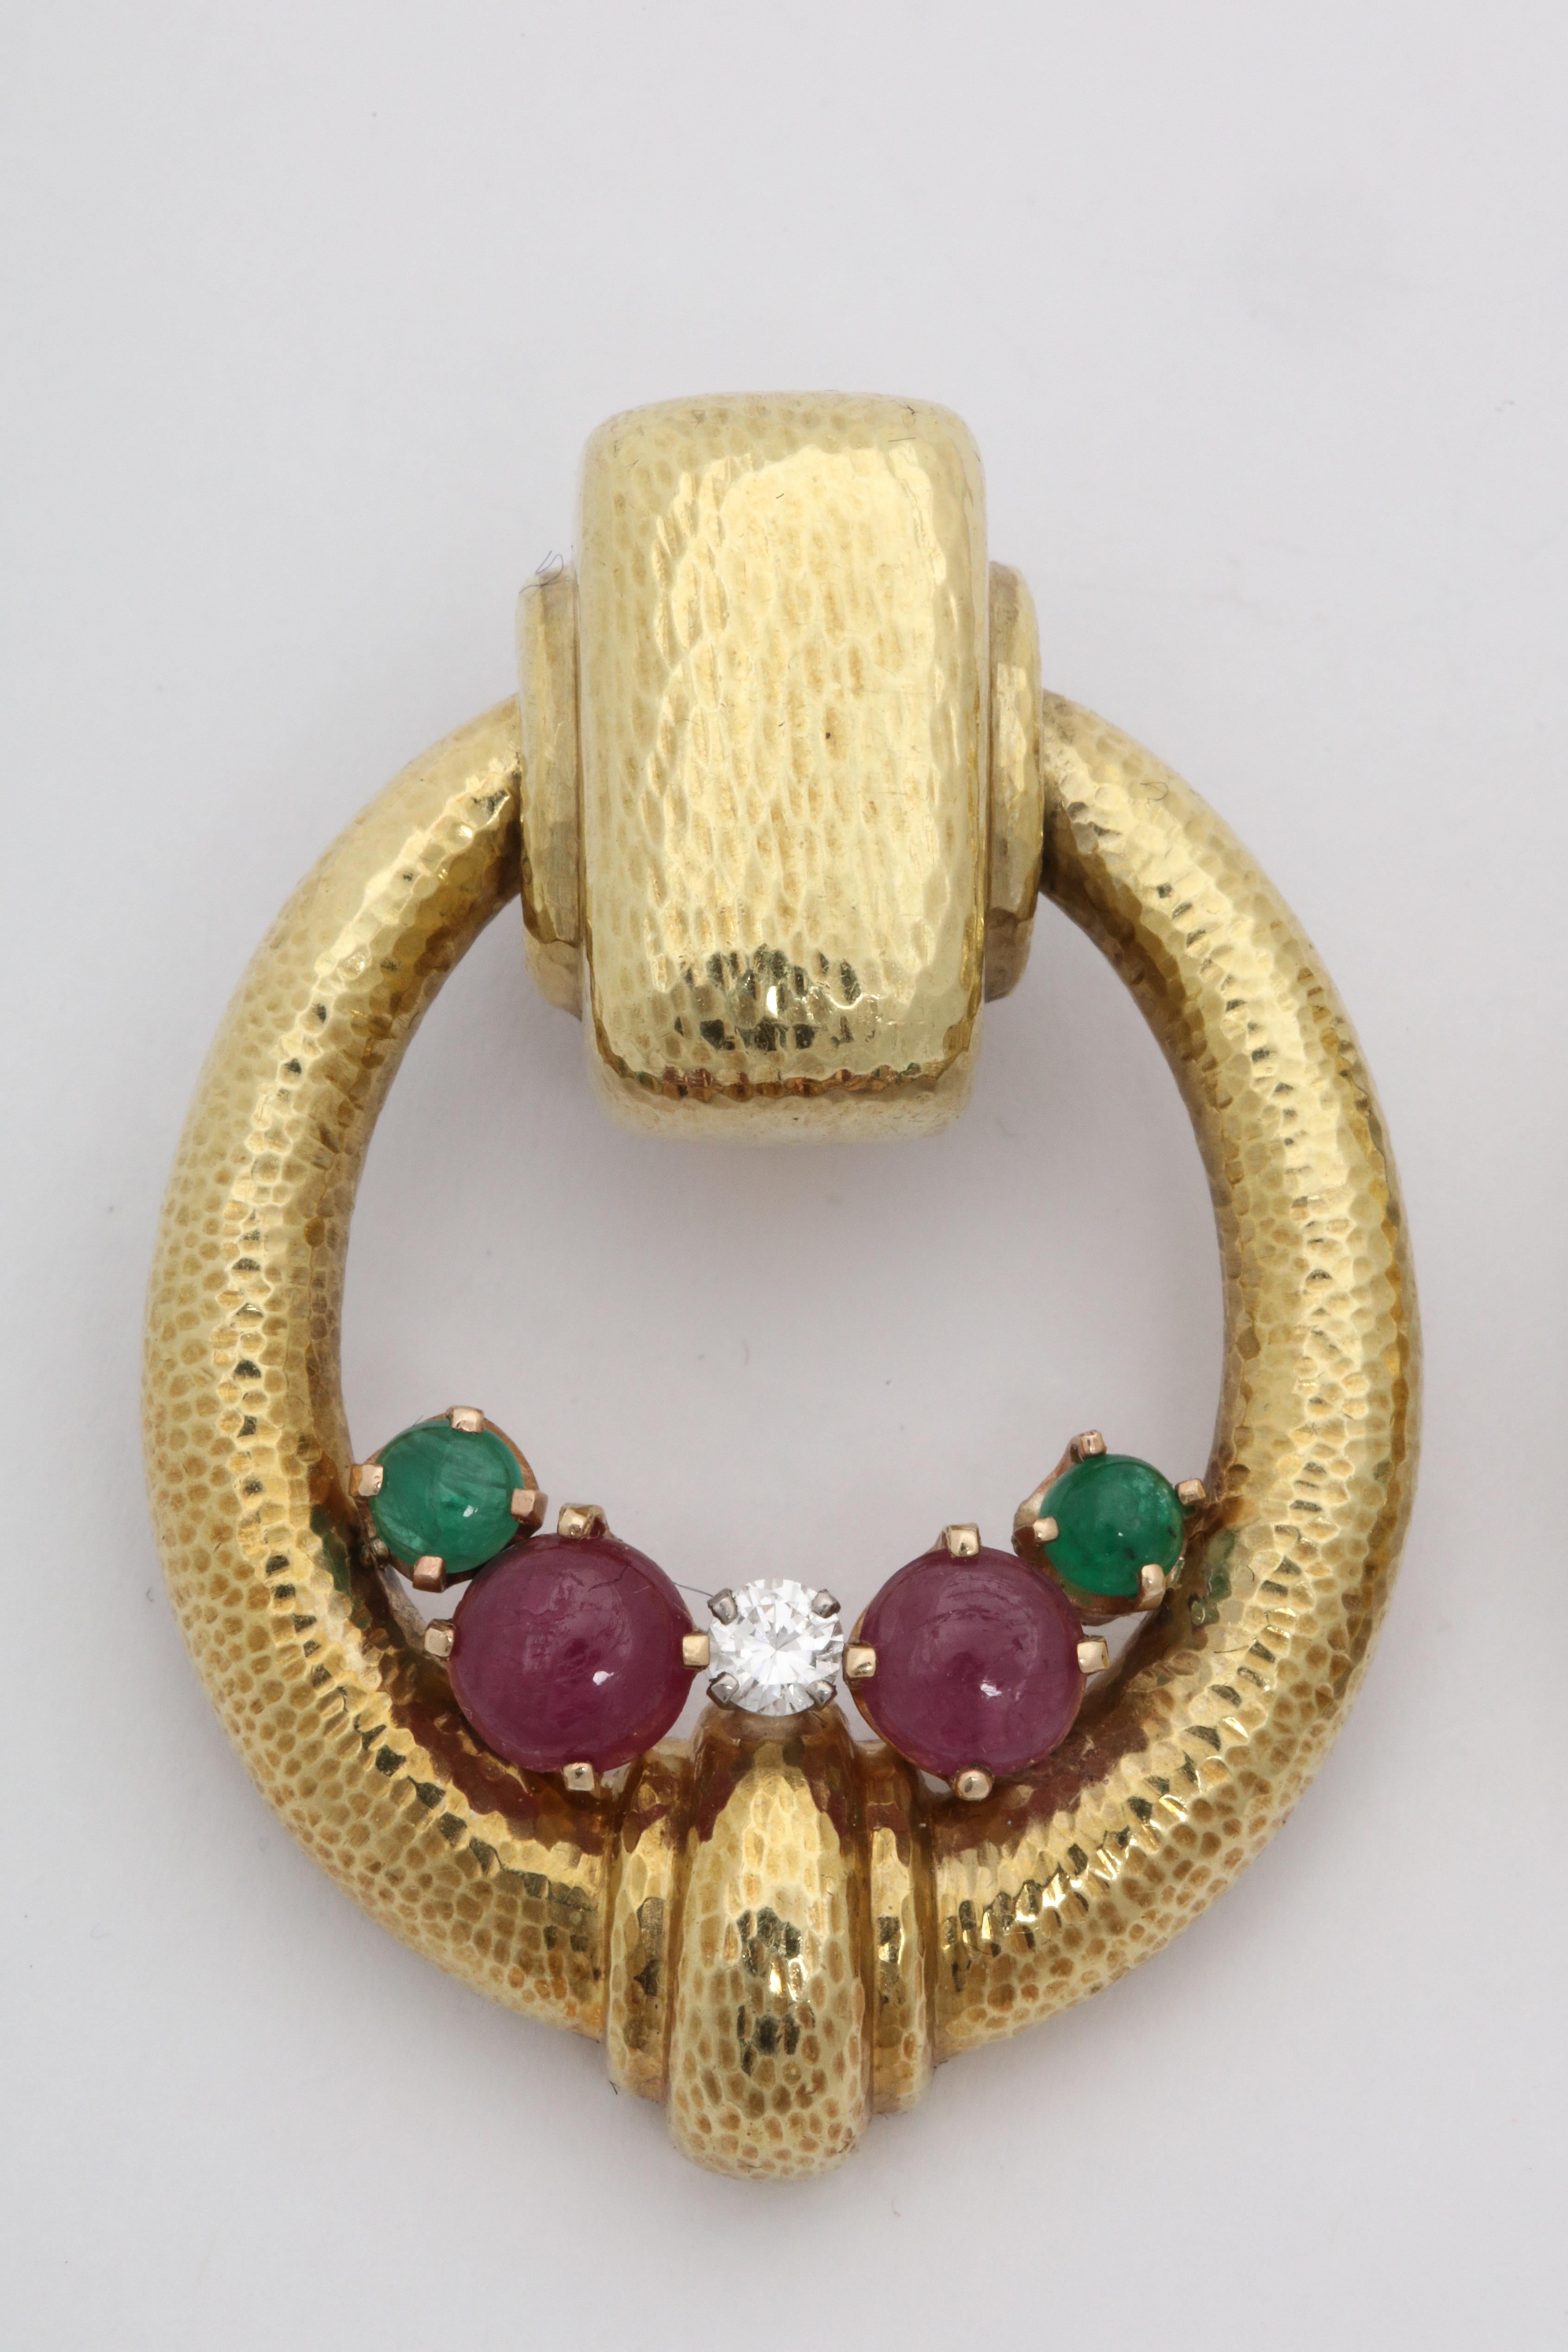 One Pair Of Ladies Moveable 18kt Yellow Gold Hand Hammered DoorKnocker Style Earclips Embellished With [4] Large Cabochon Rubies Weighing Approximately [4] Carats Earclips Are Further Embellished With [4] Cabochon Emeralds Weighing Approximately [2]